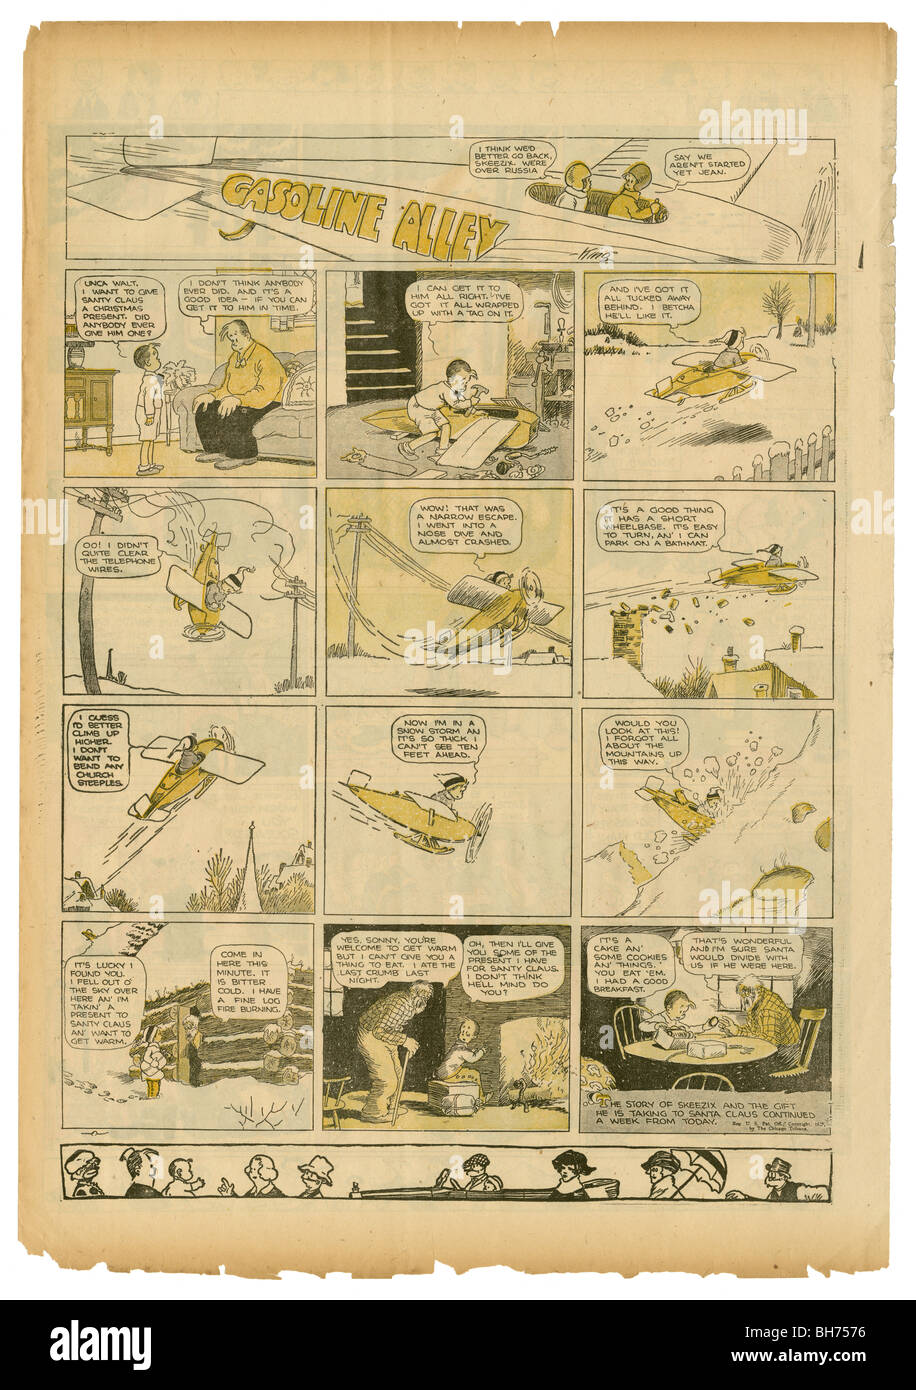 1927 Sunday comic strip, Gasoline Alley by Frank King. Stock Photo